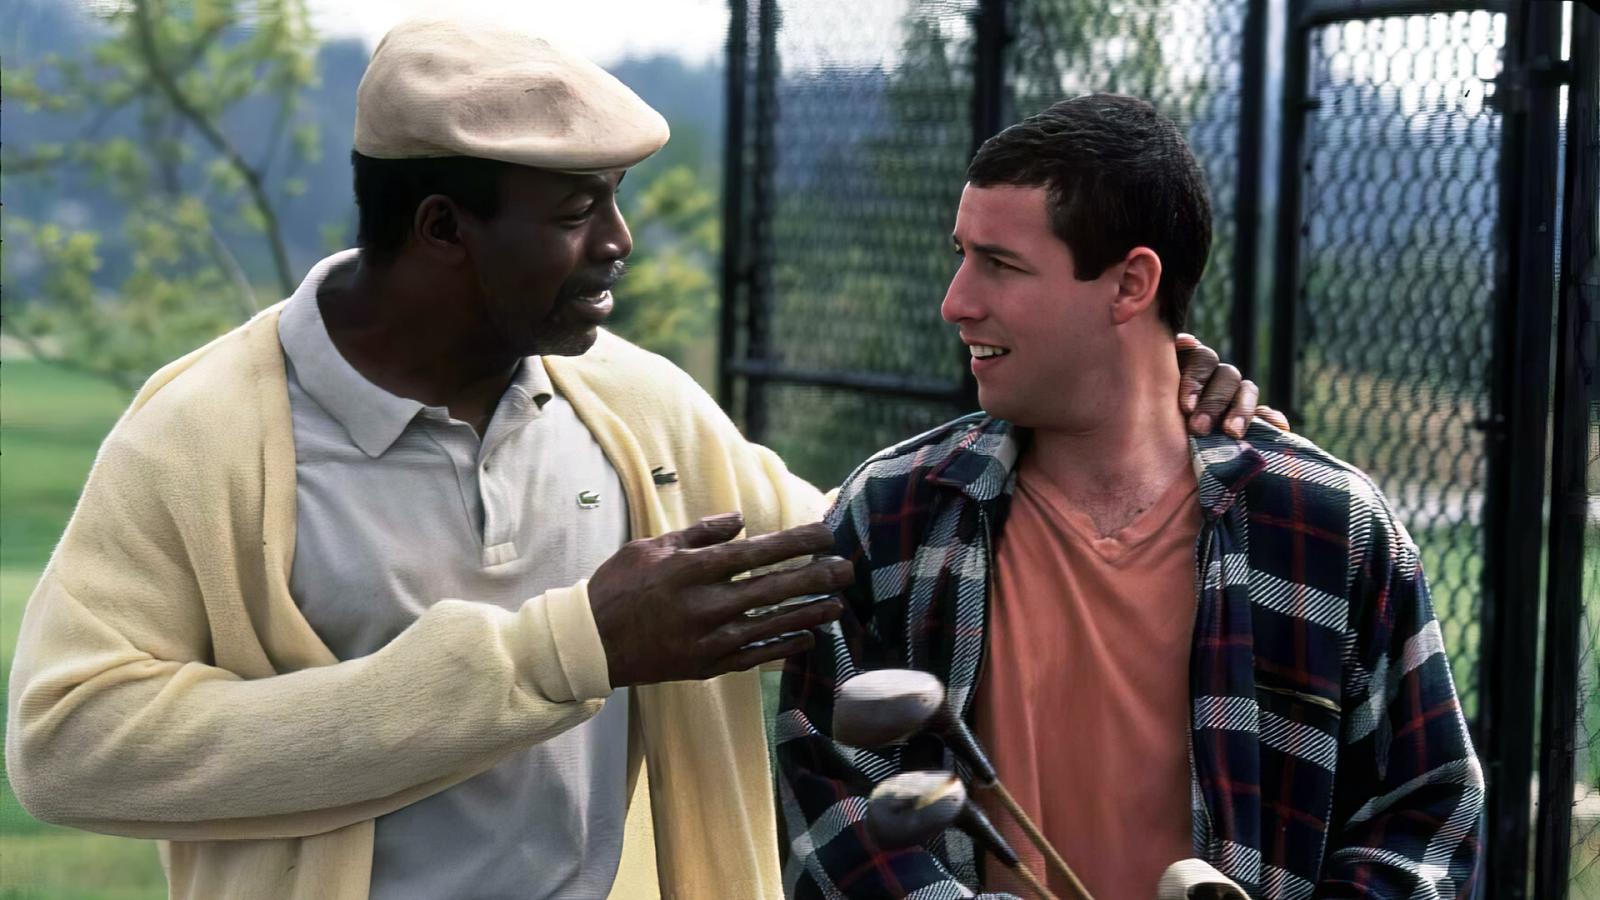 15 Best Movies With Adam Sandler to Watch With Family - image 1